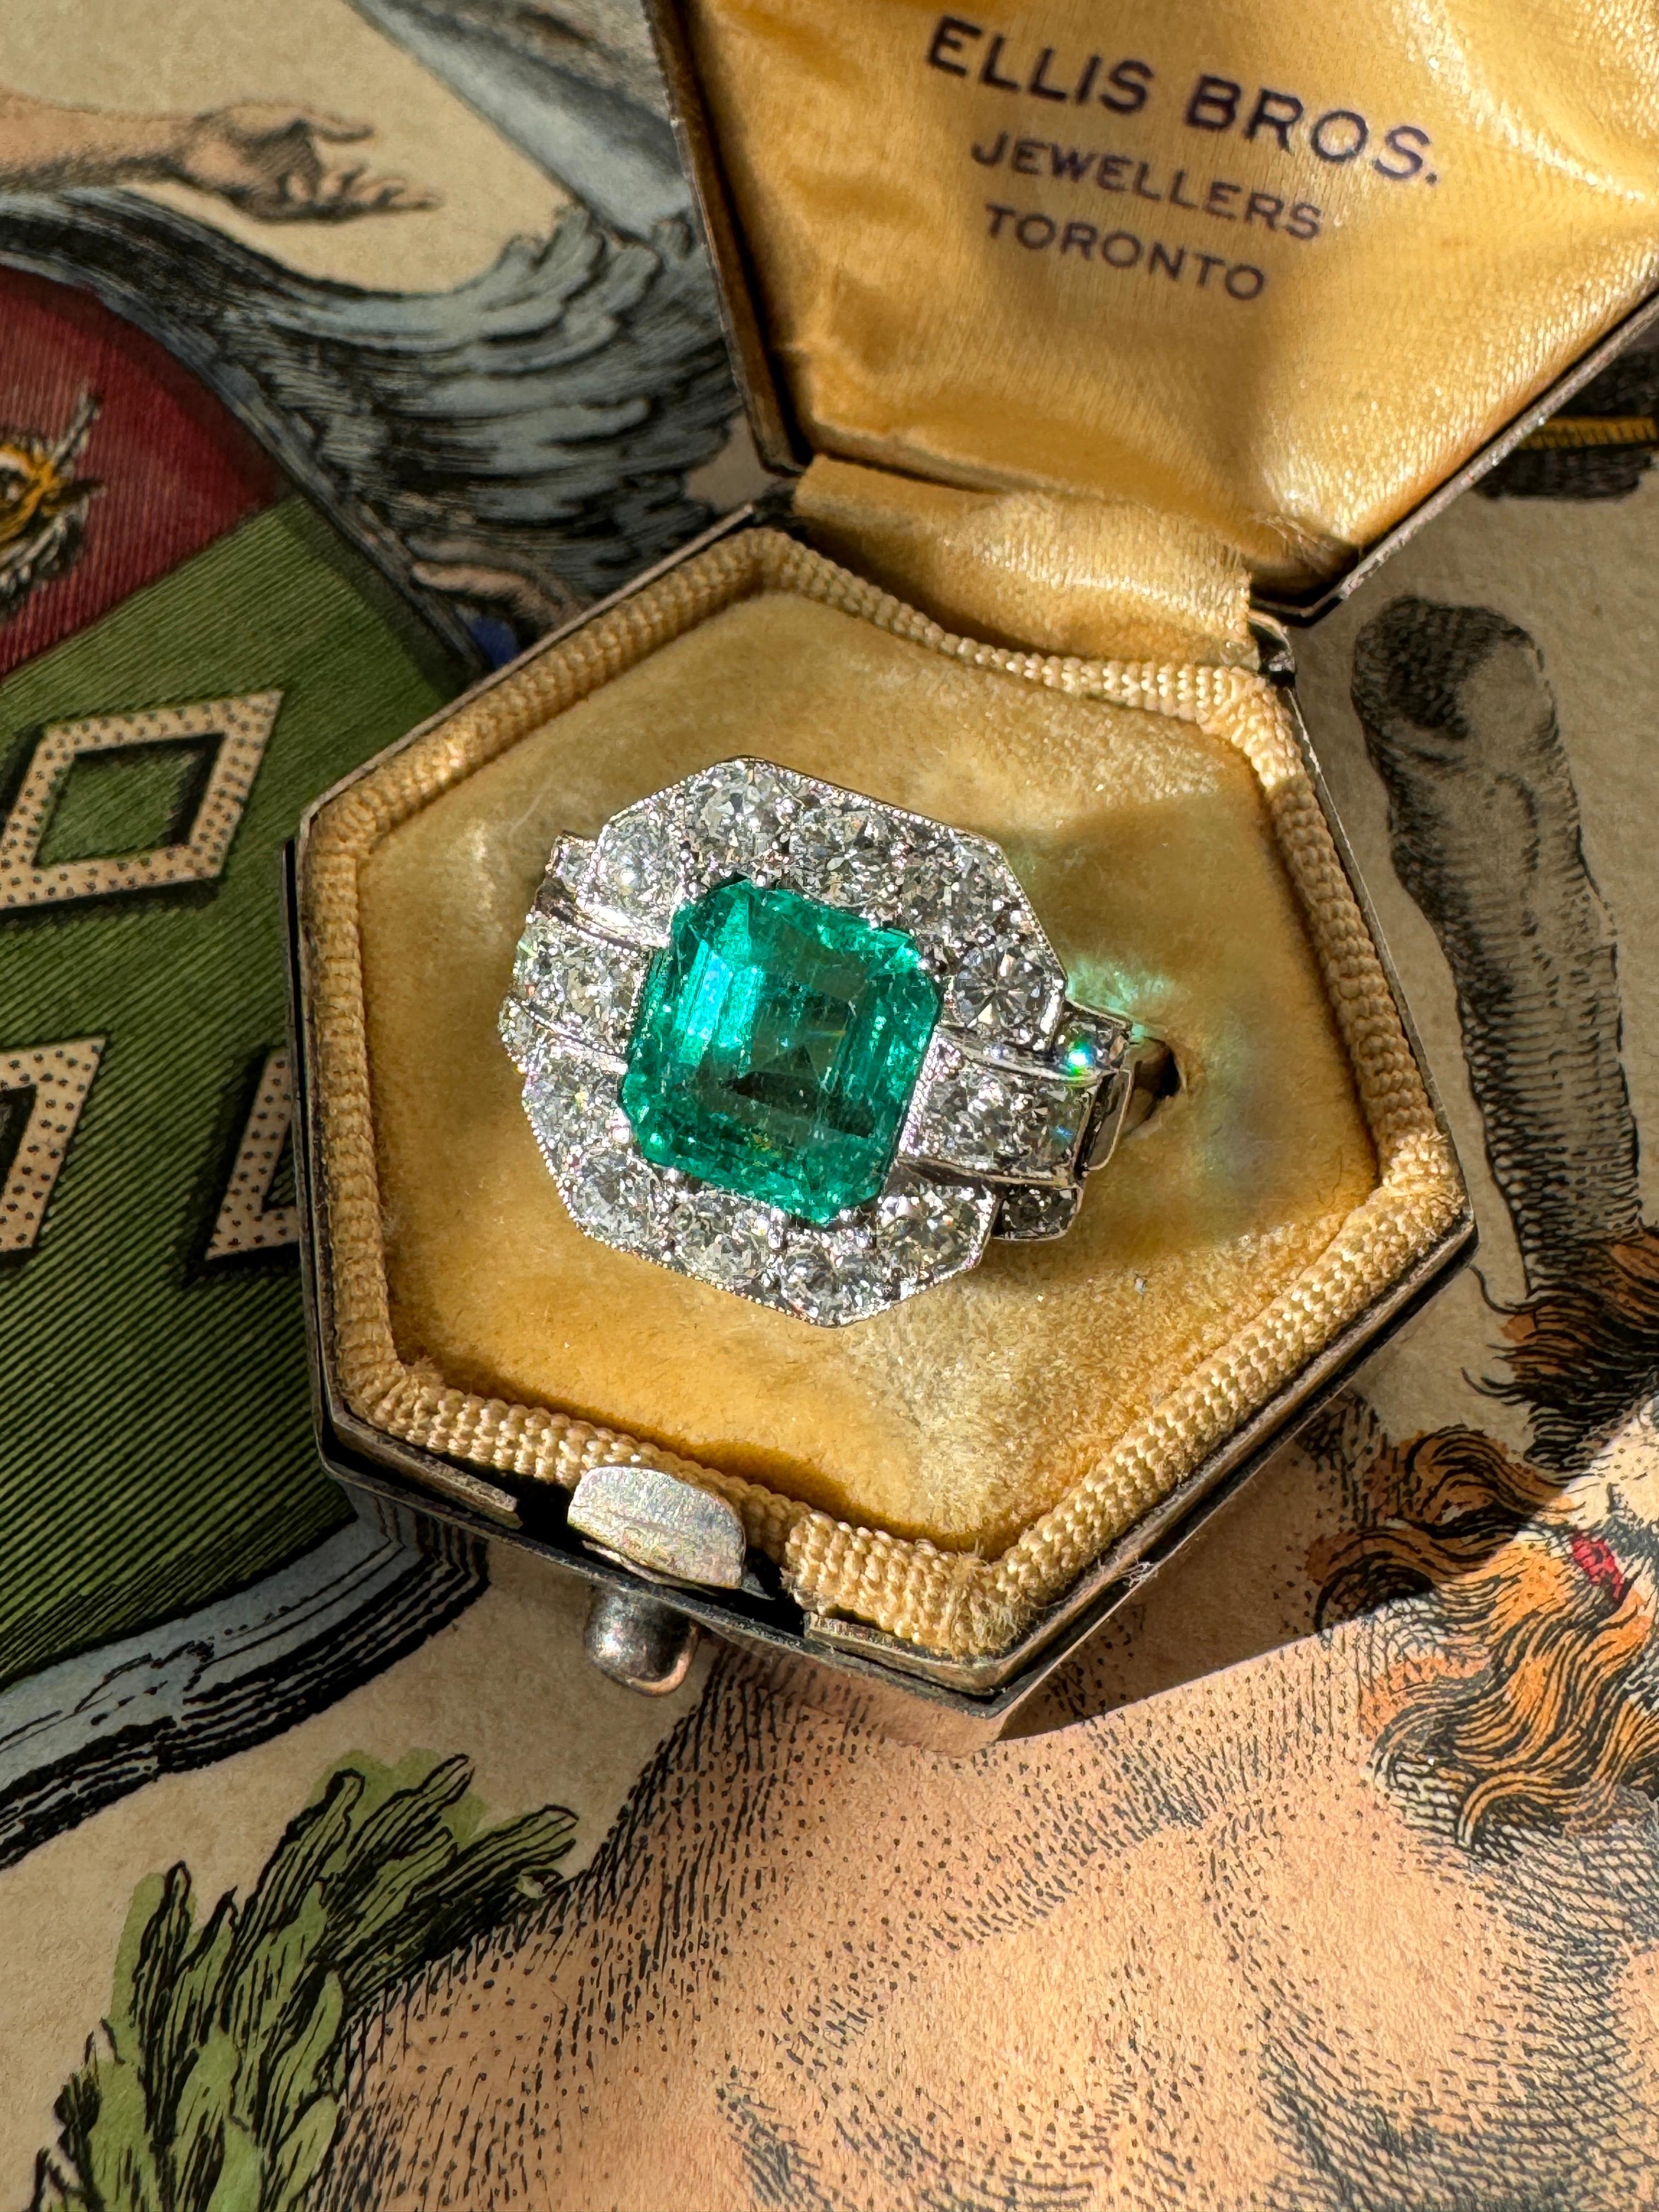 A lush and lively octagonal step-cut Colombian emerald, weighing 2.5 carats, is elegantly presented in a frame of sparkling brilliant-cut diamonds. This low profile ring boasts gently rolled shoulders with a side gallery adorned with hand engraved